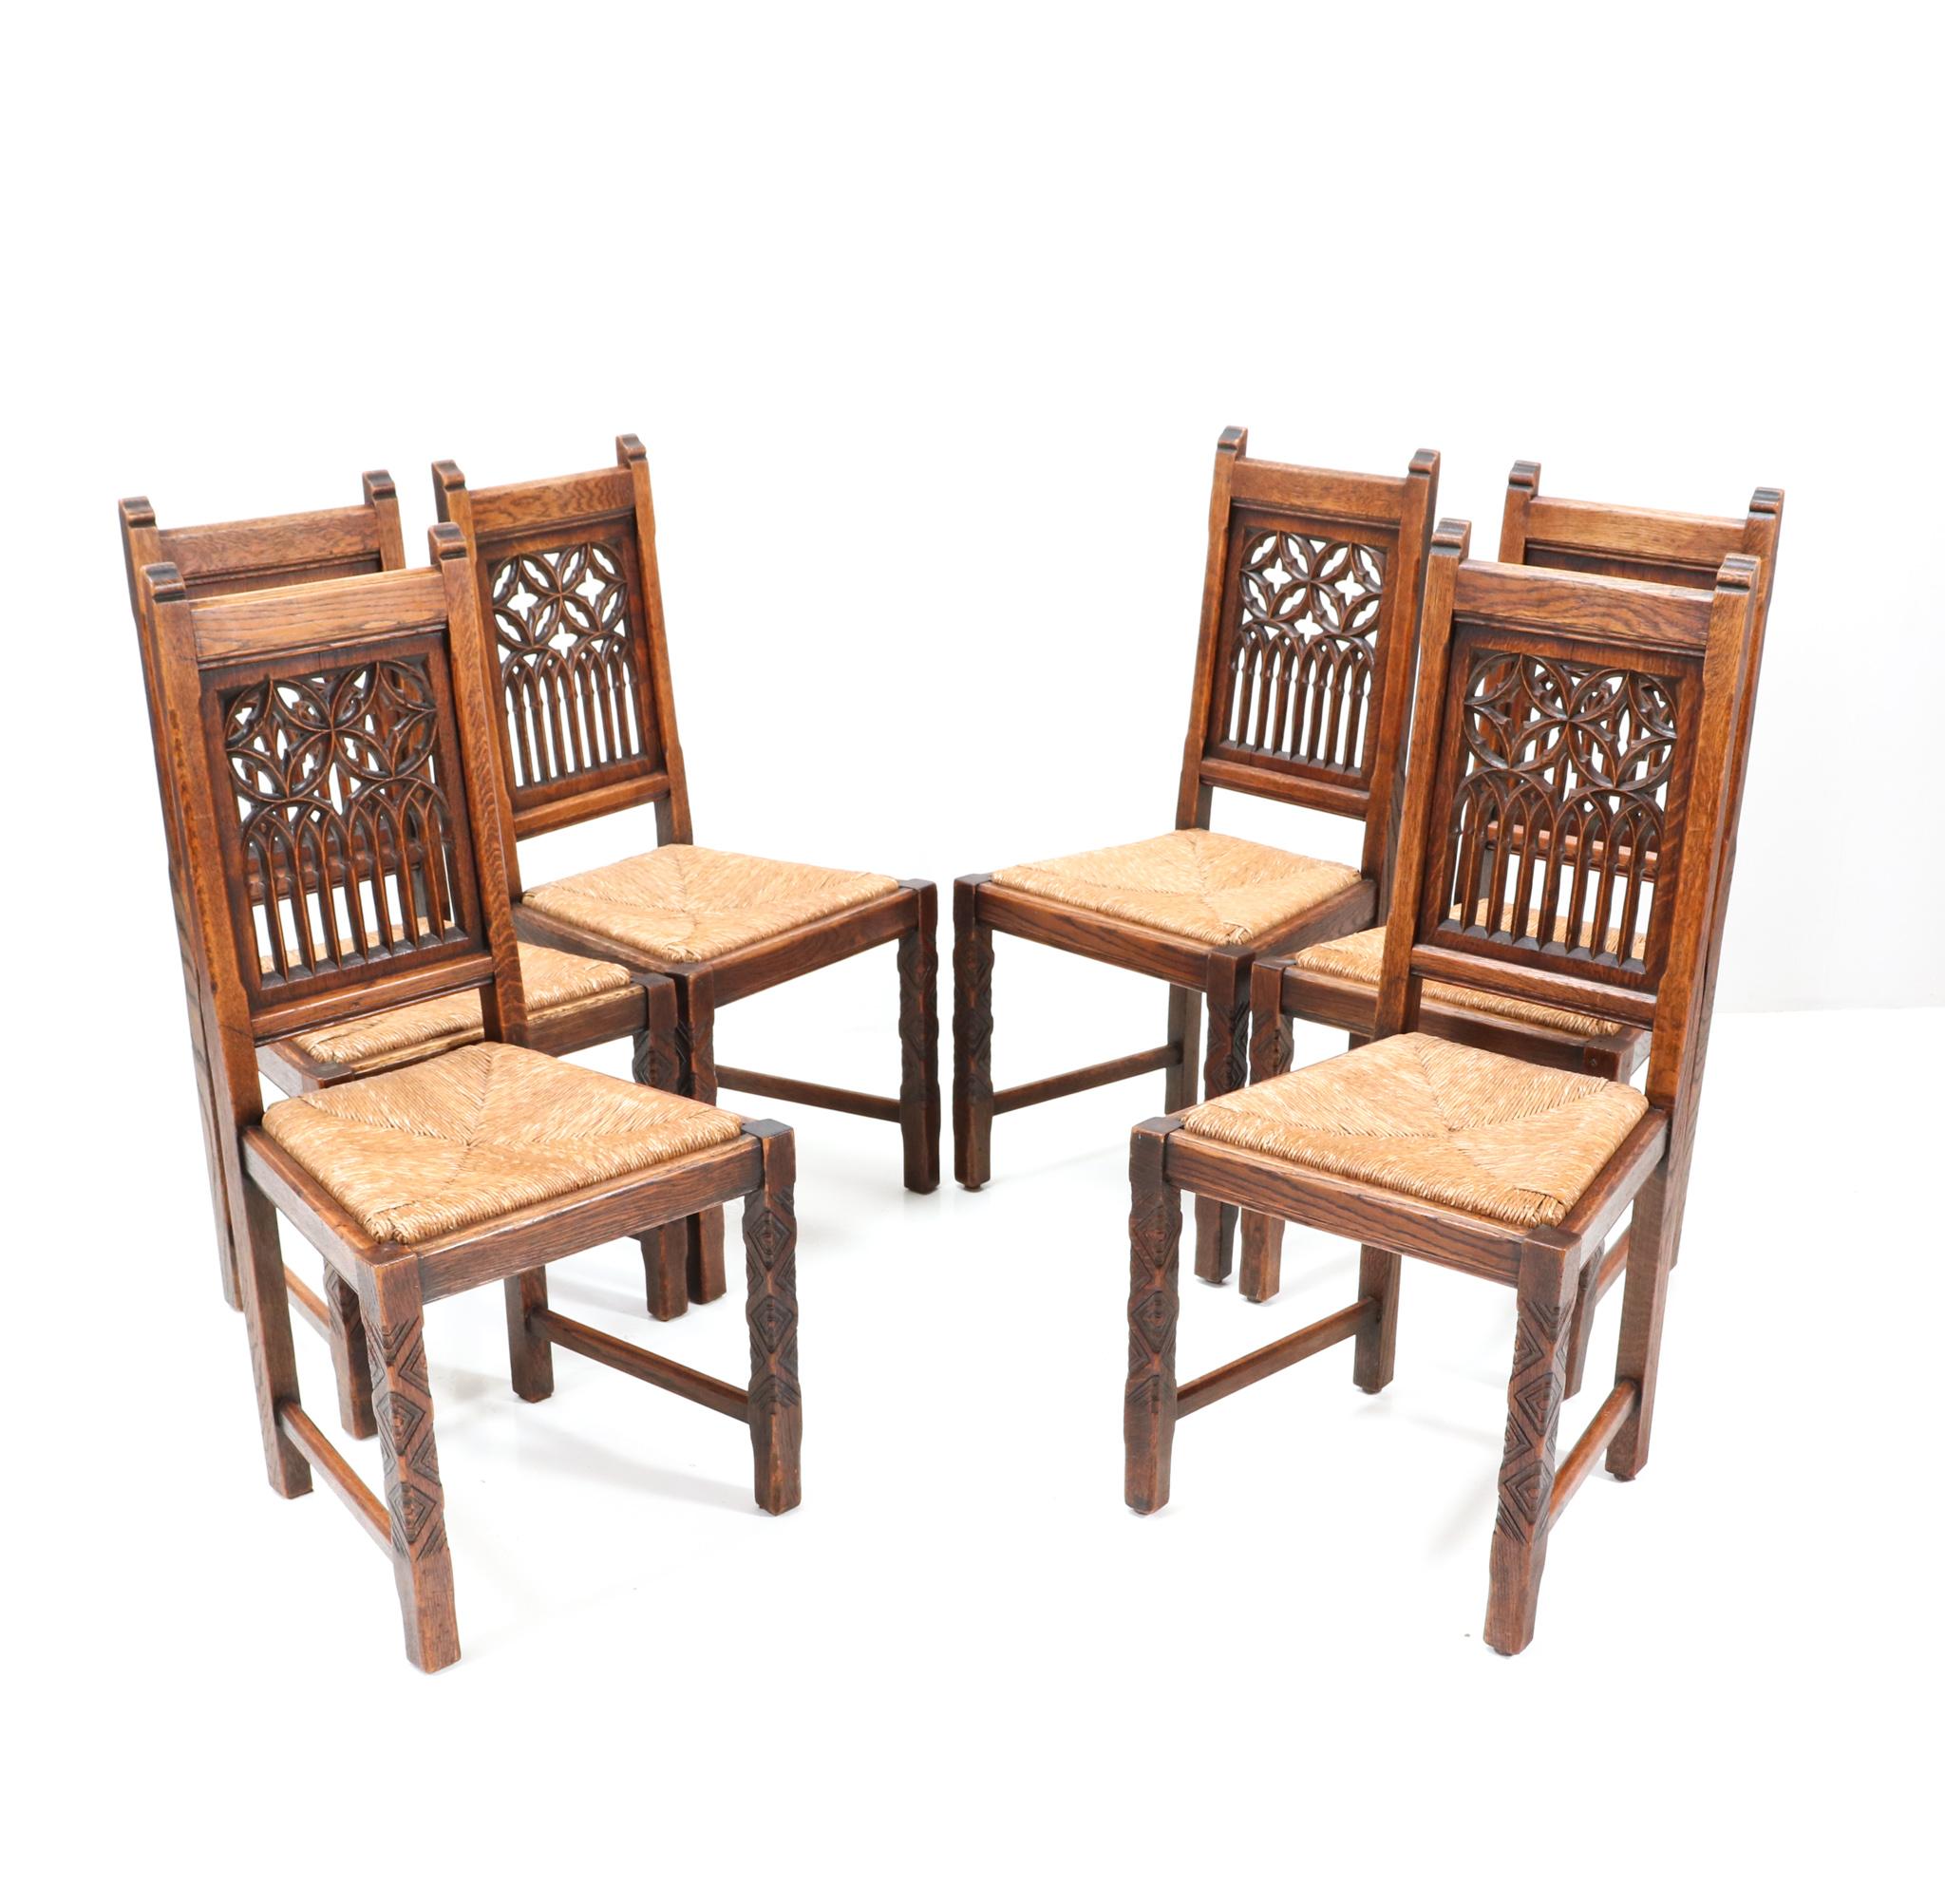 Magnificent and rare set of six Gothic Revival dining room chairs.
Striking Dutch design from the 1930s.
Solid oak frames with hand-carved church windows panels at the backside of the chairs.
The front legs have hand-carved decoration as